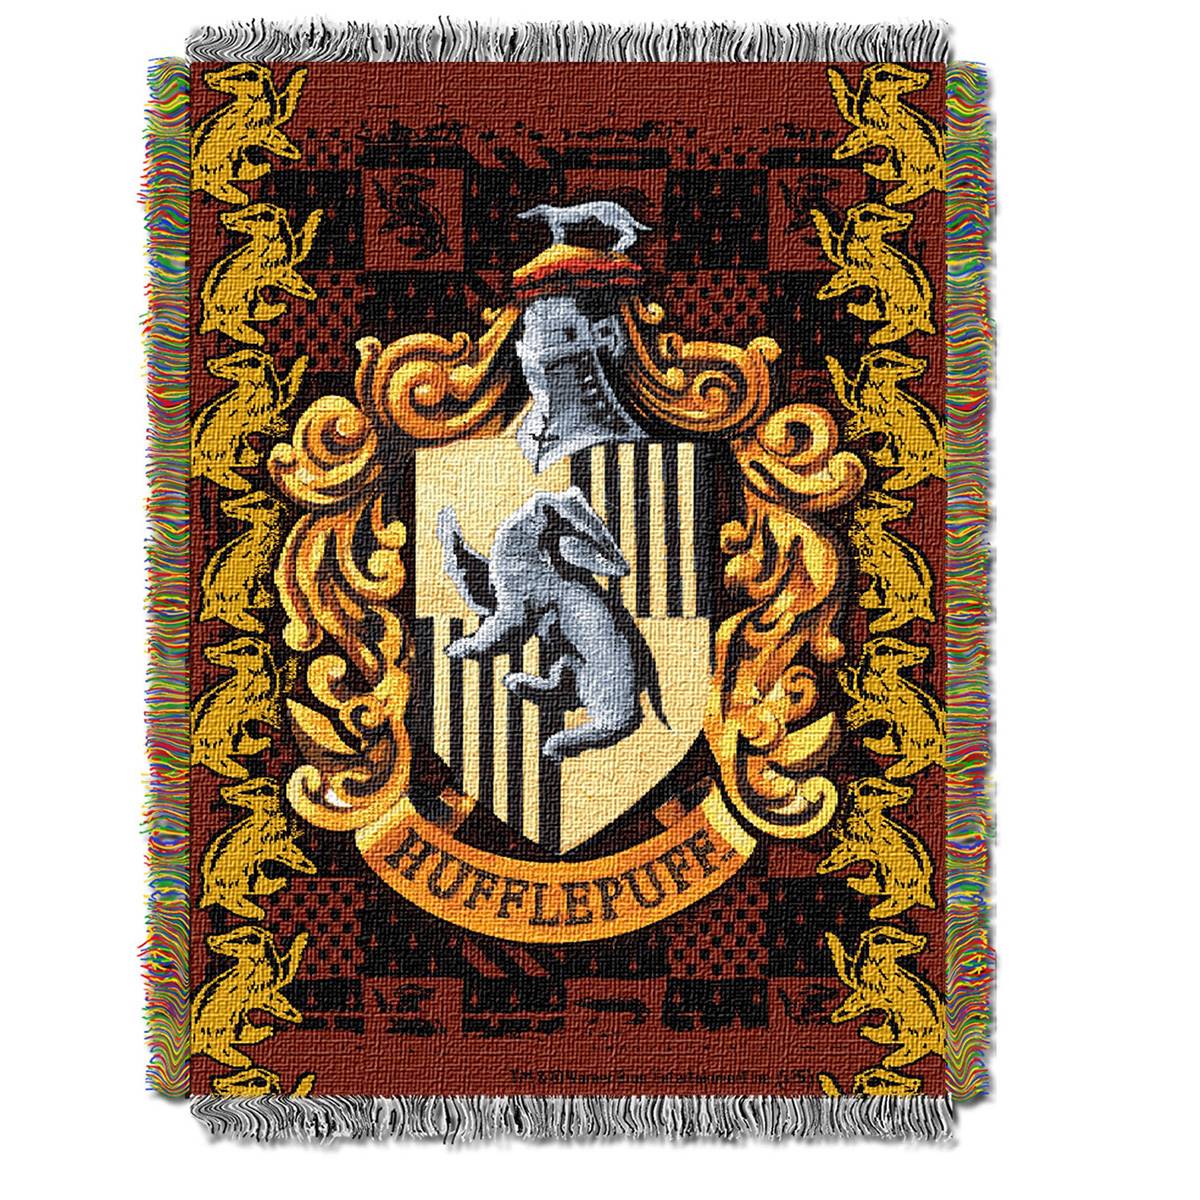 Northwest Harry Potter Hufflepuff Crest Woven Tapestry Throw